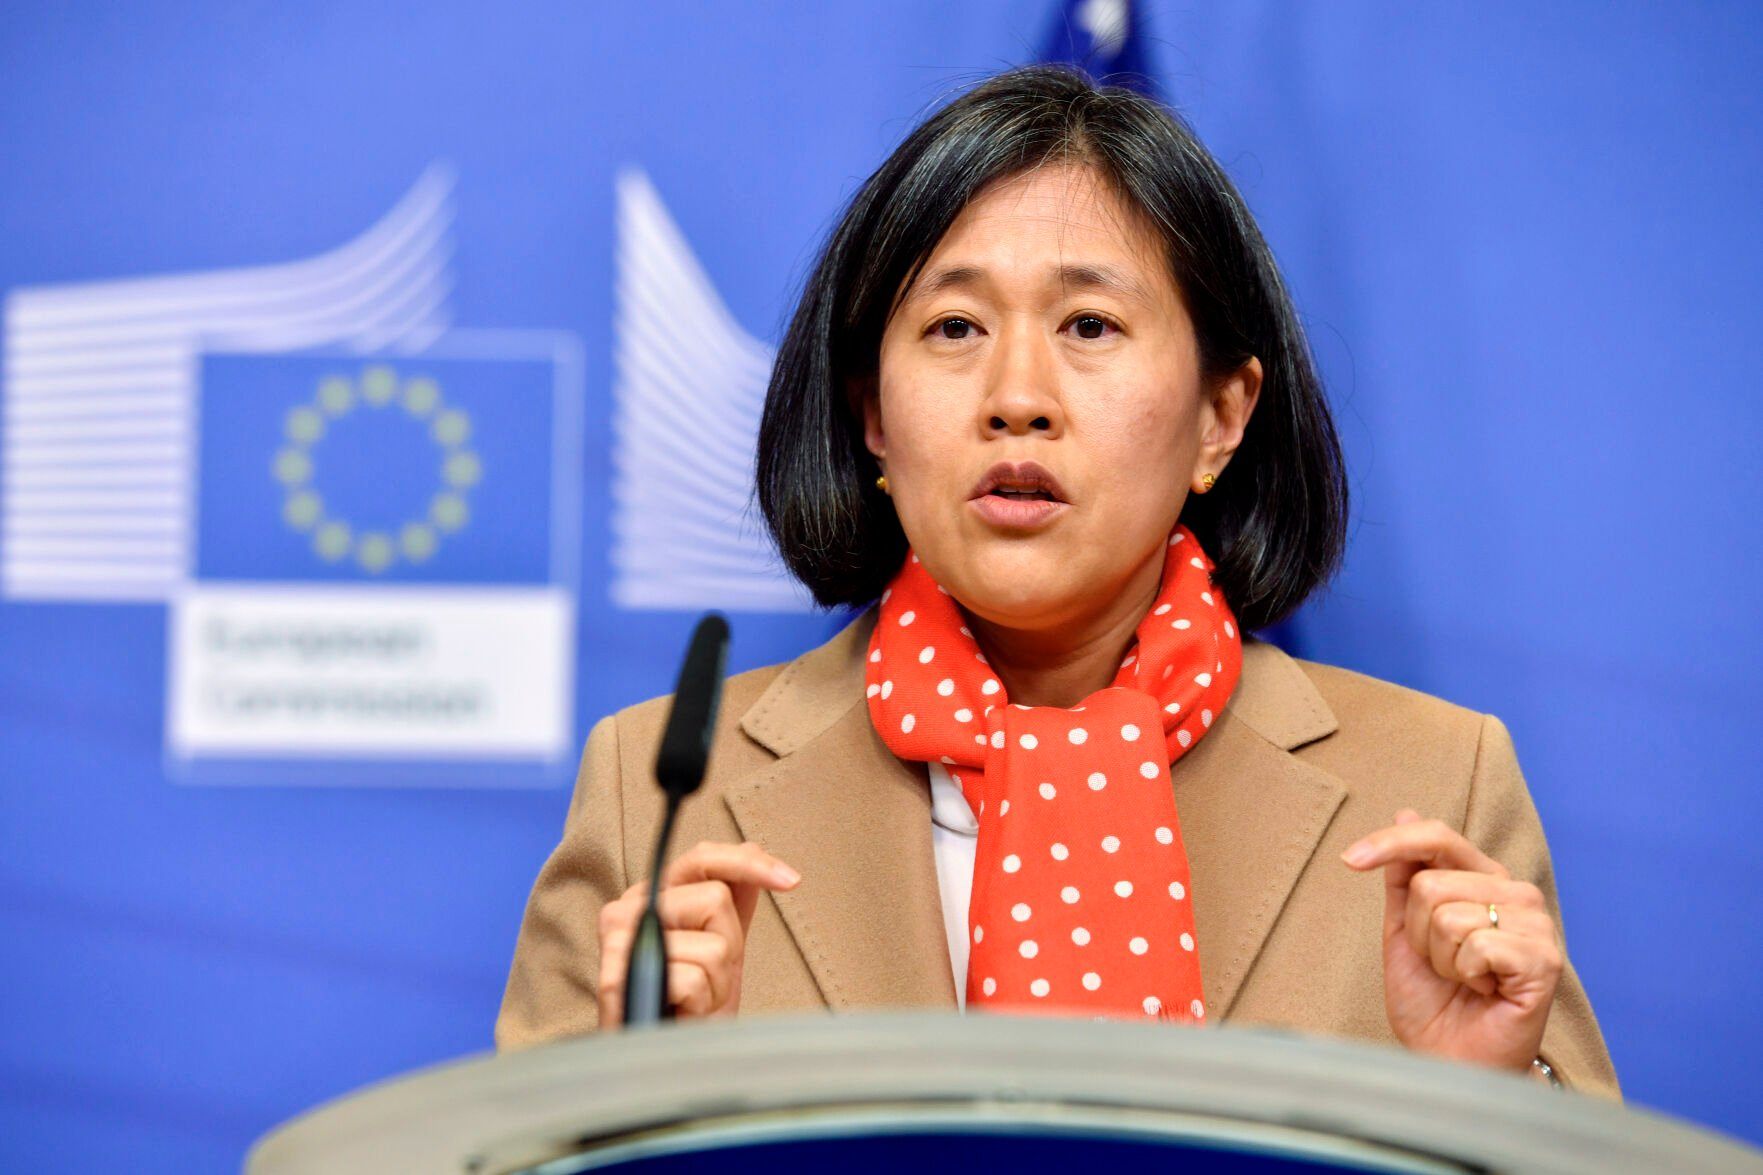 <p>FILE - United States Trade Representative Katherine Tai addresses the media on recent developments in transatlantic trade after a meeting at EU headquarters in Brussels, on Jan. 17, 2023. The Biden administration is pressing its case for a new approach to global trade. On Wednesday, April 5, Tai is expected to call for a strategy of what’s known as “friend-shoring’’ — building up supply chains among allied countries and reducing dependence on geopolitical rivals such as China. (AP Photo/Geert Vanden Wijngaert, File)</p>   PHOTO CREDIT: Geert Vanden Wijngaert 